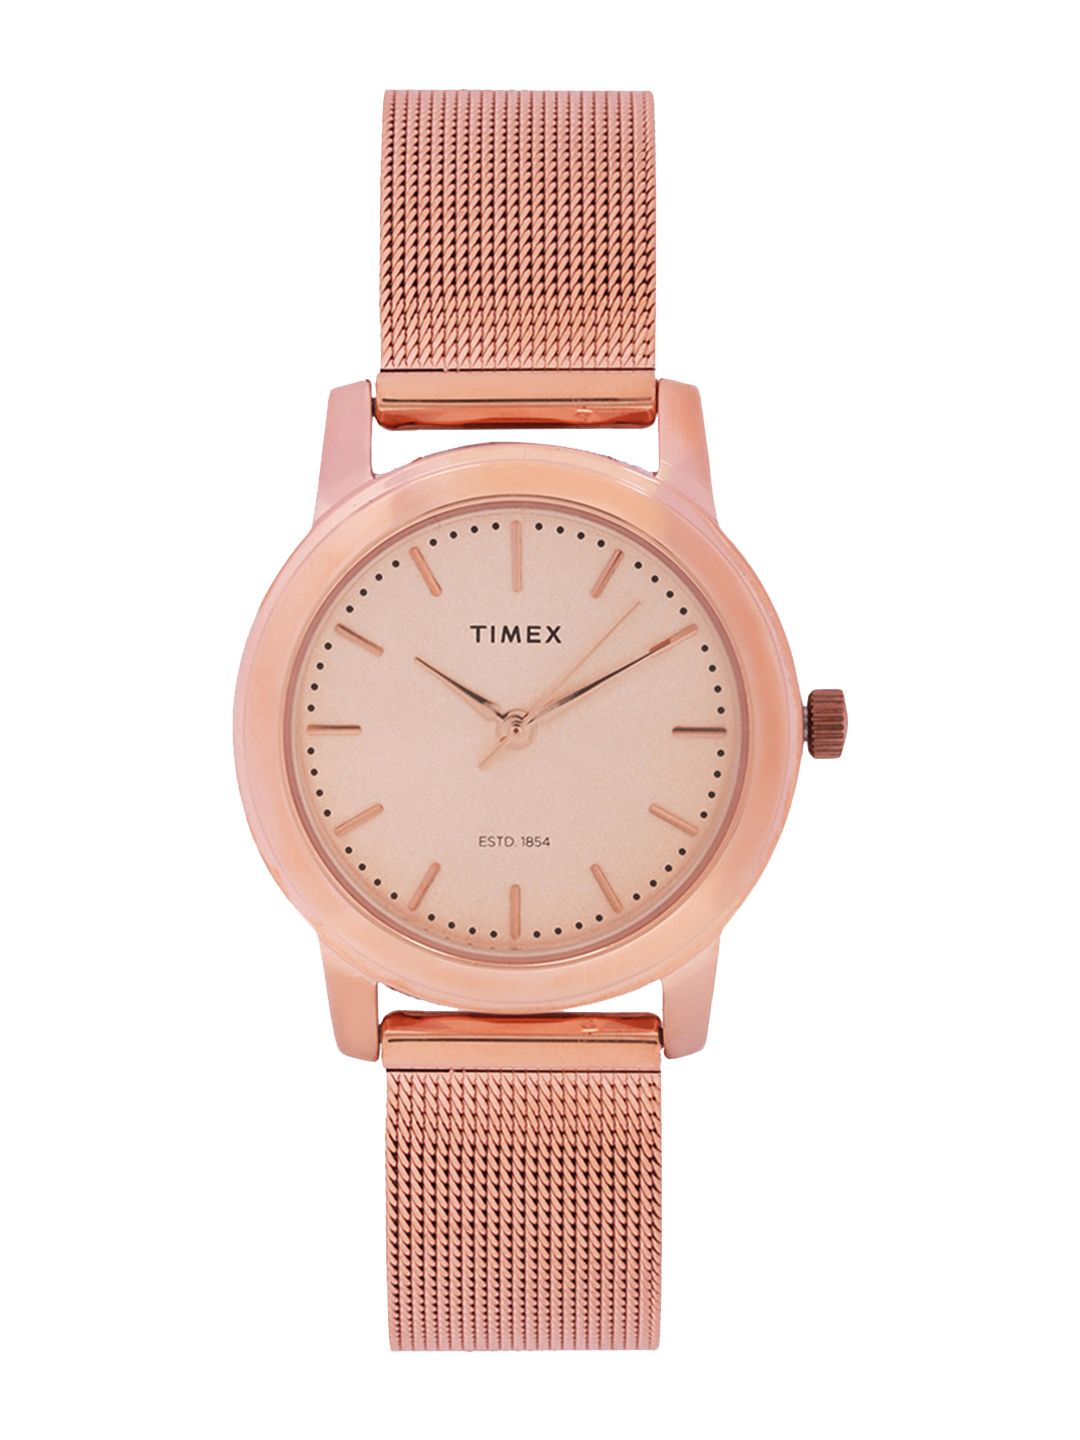 Timex Women Rose Gold-Toned Analogue Watch - TW000W111 Price in India